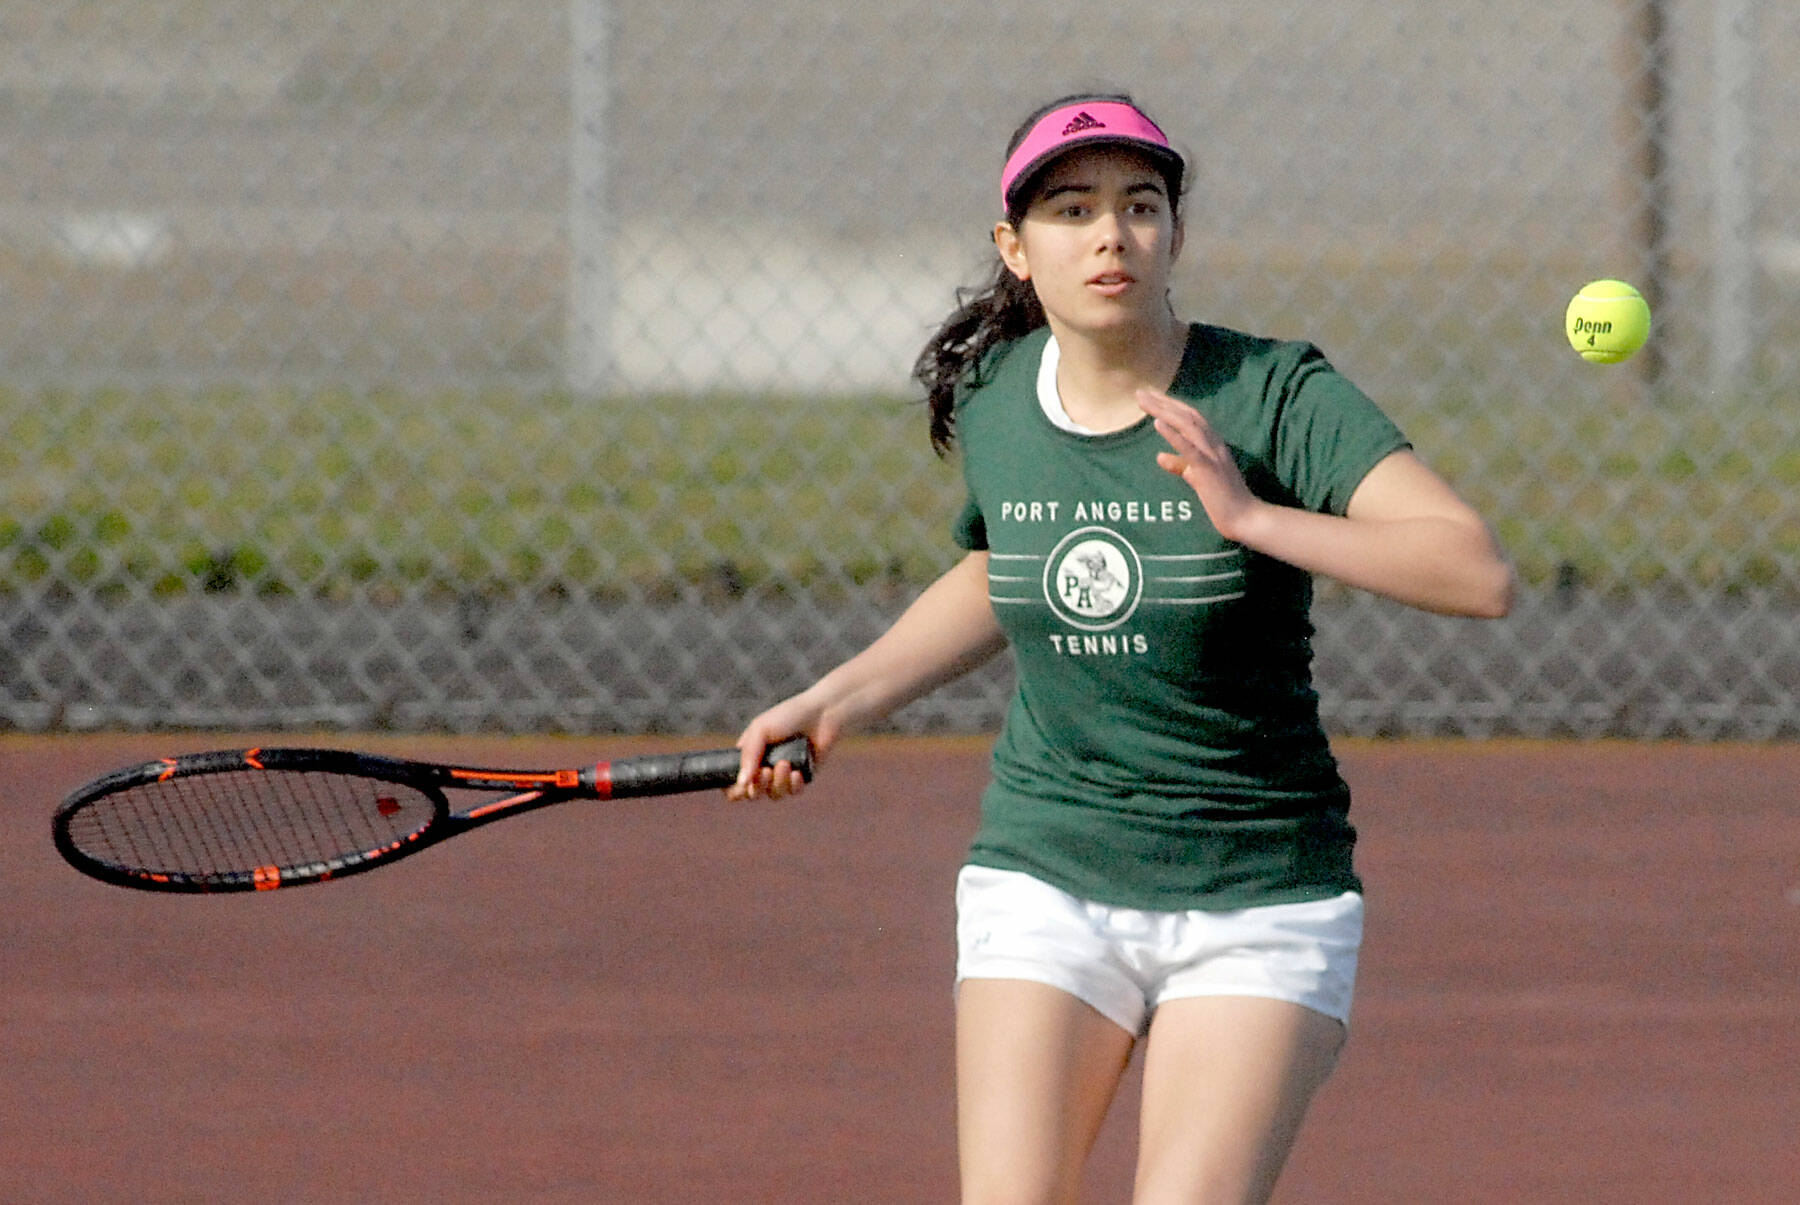 Port Angeles’ Liberty Lauer approches the ball in her singles match on Thursday against North Kitsap’s Teegan DeVries at Port Angeles High School. (Keith Thorpe/Peninsula Daily News)